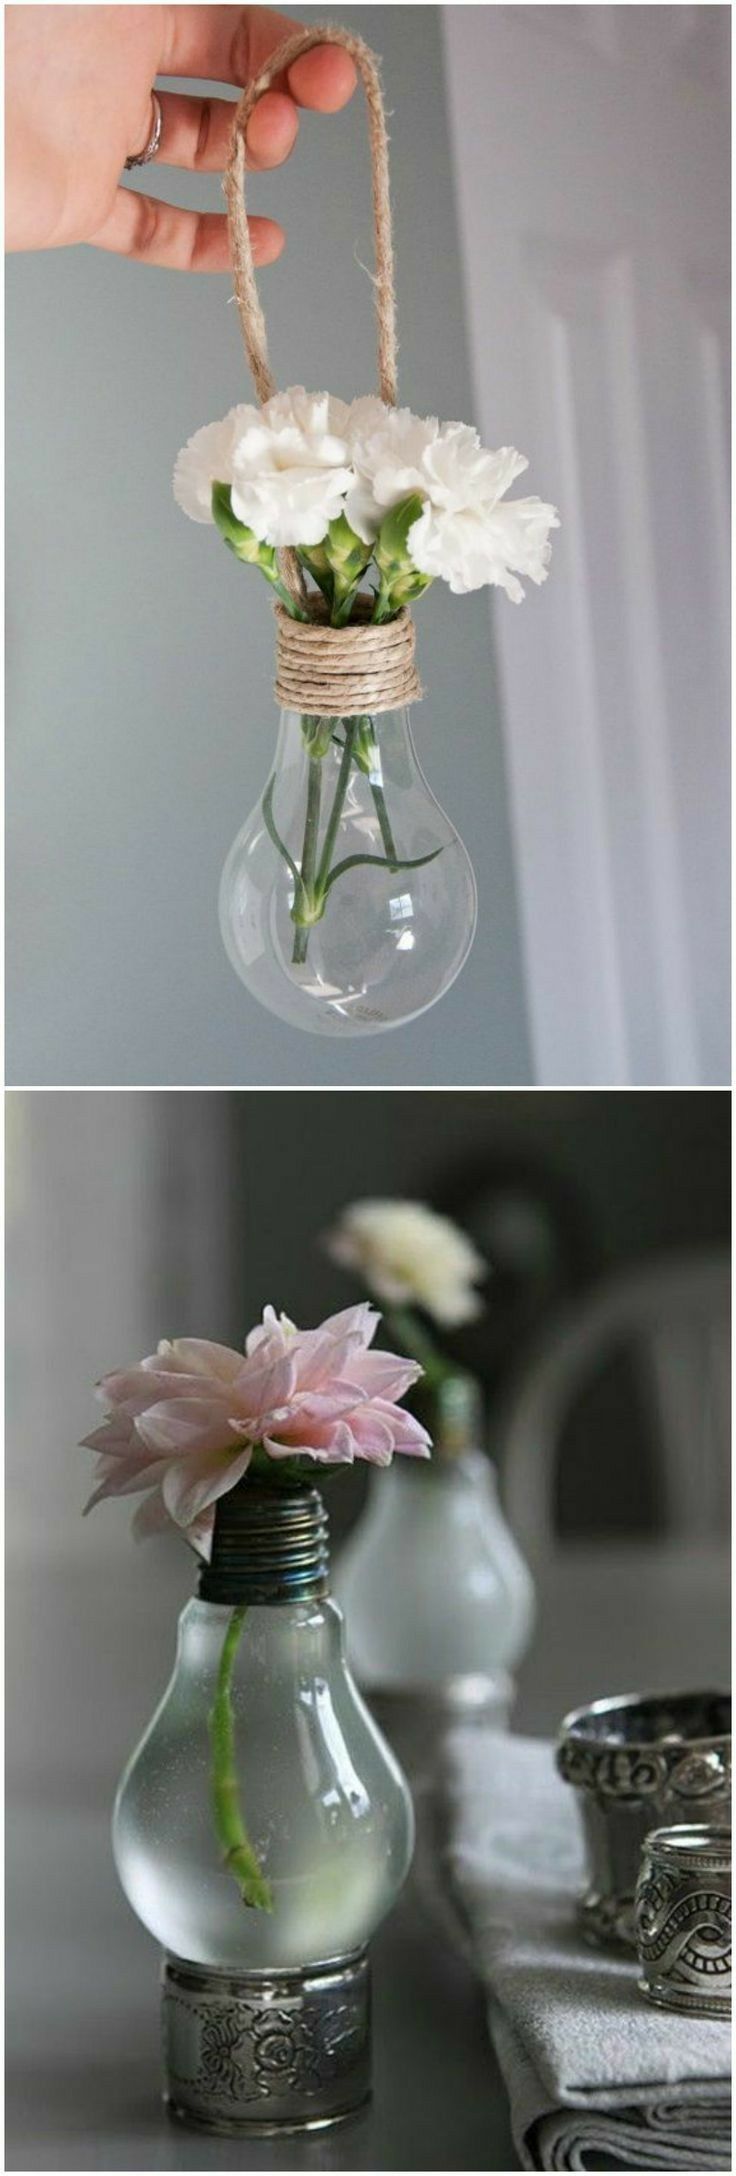 DIY PROJECTS